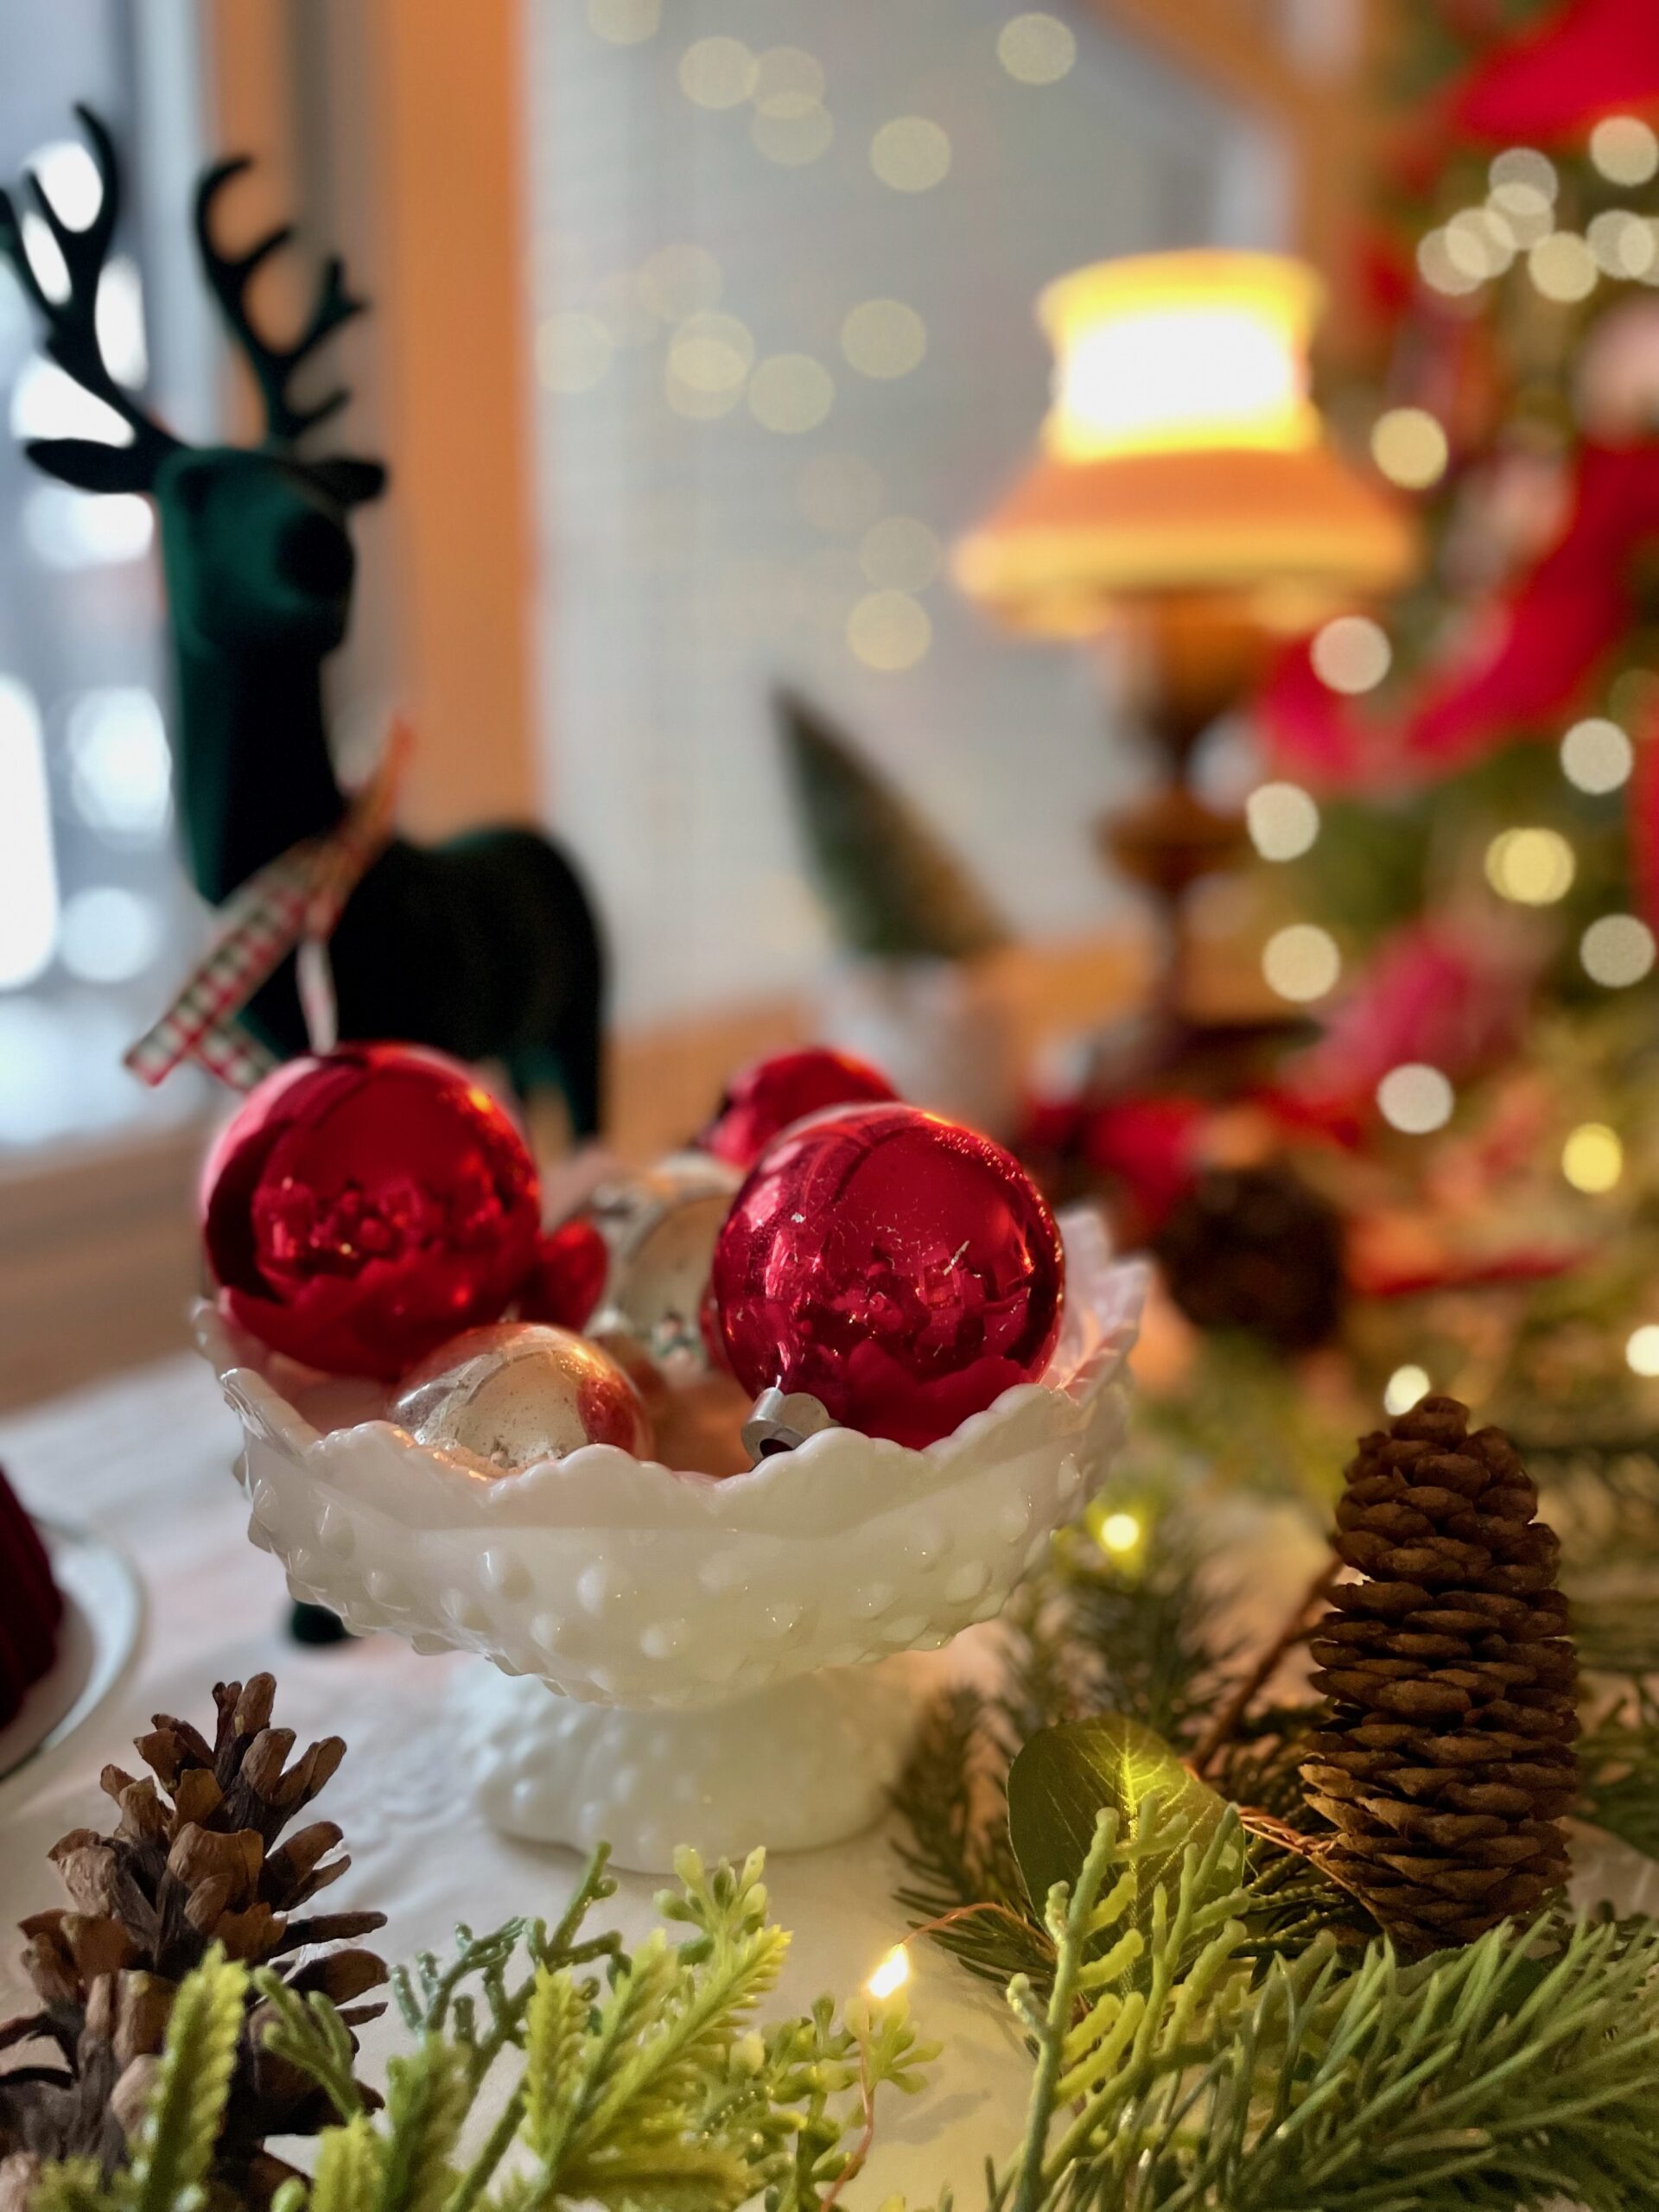 vintage Christmas ornaments in a milk glass bowl with lit garland